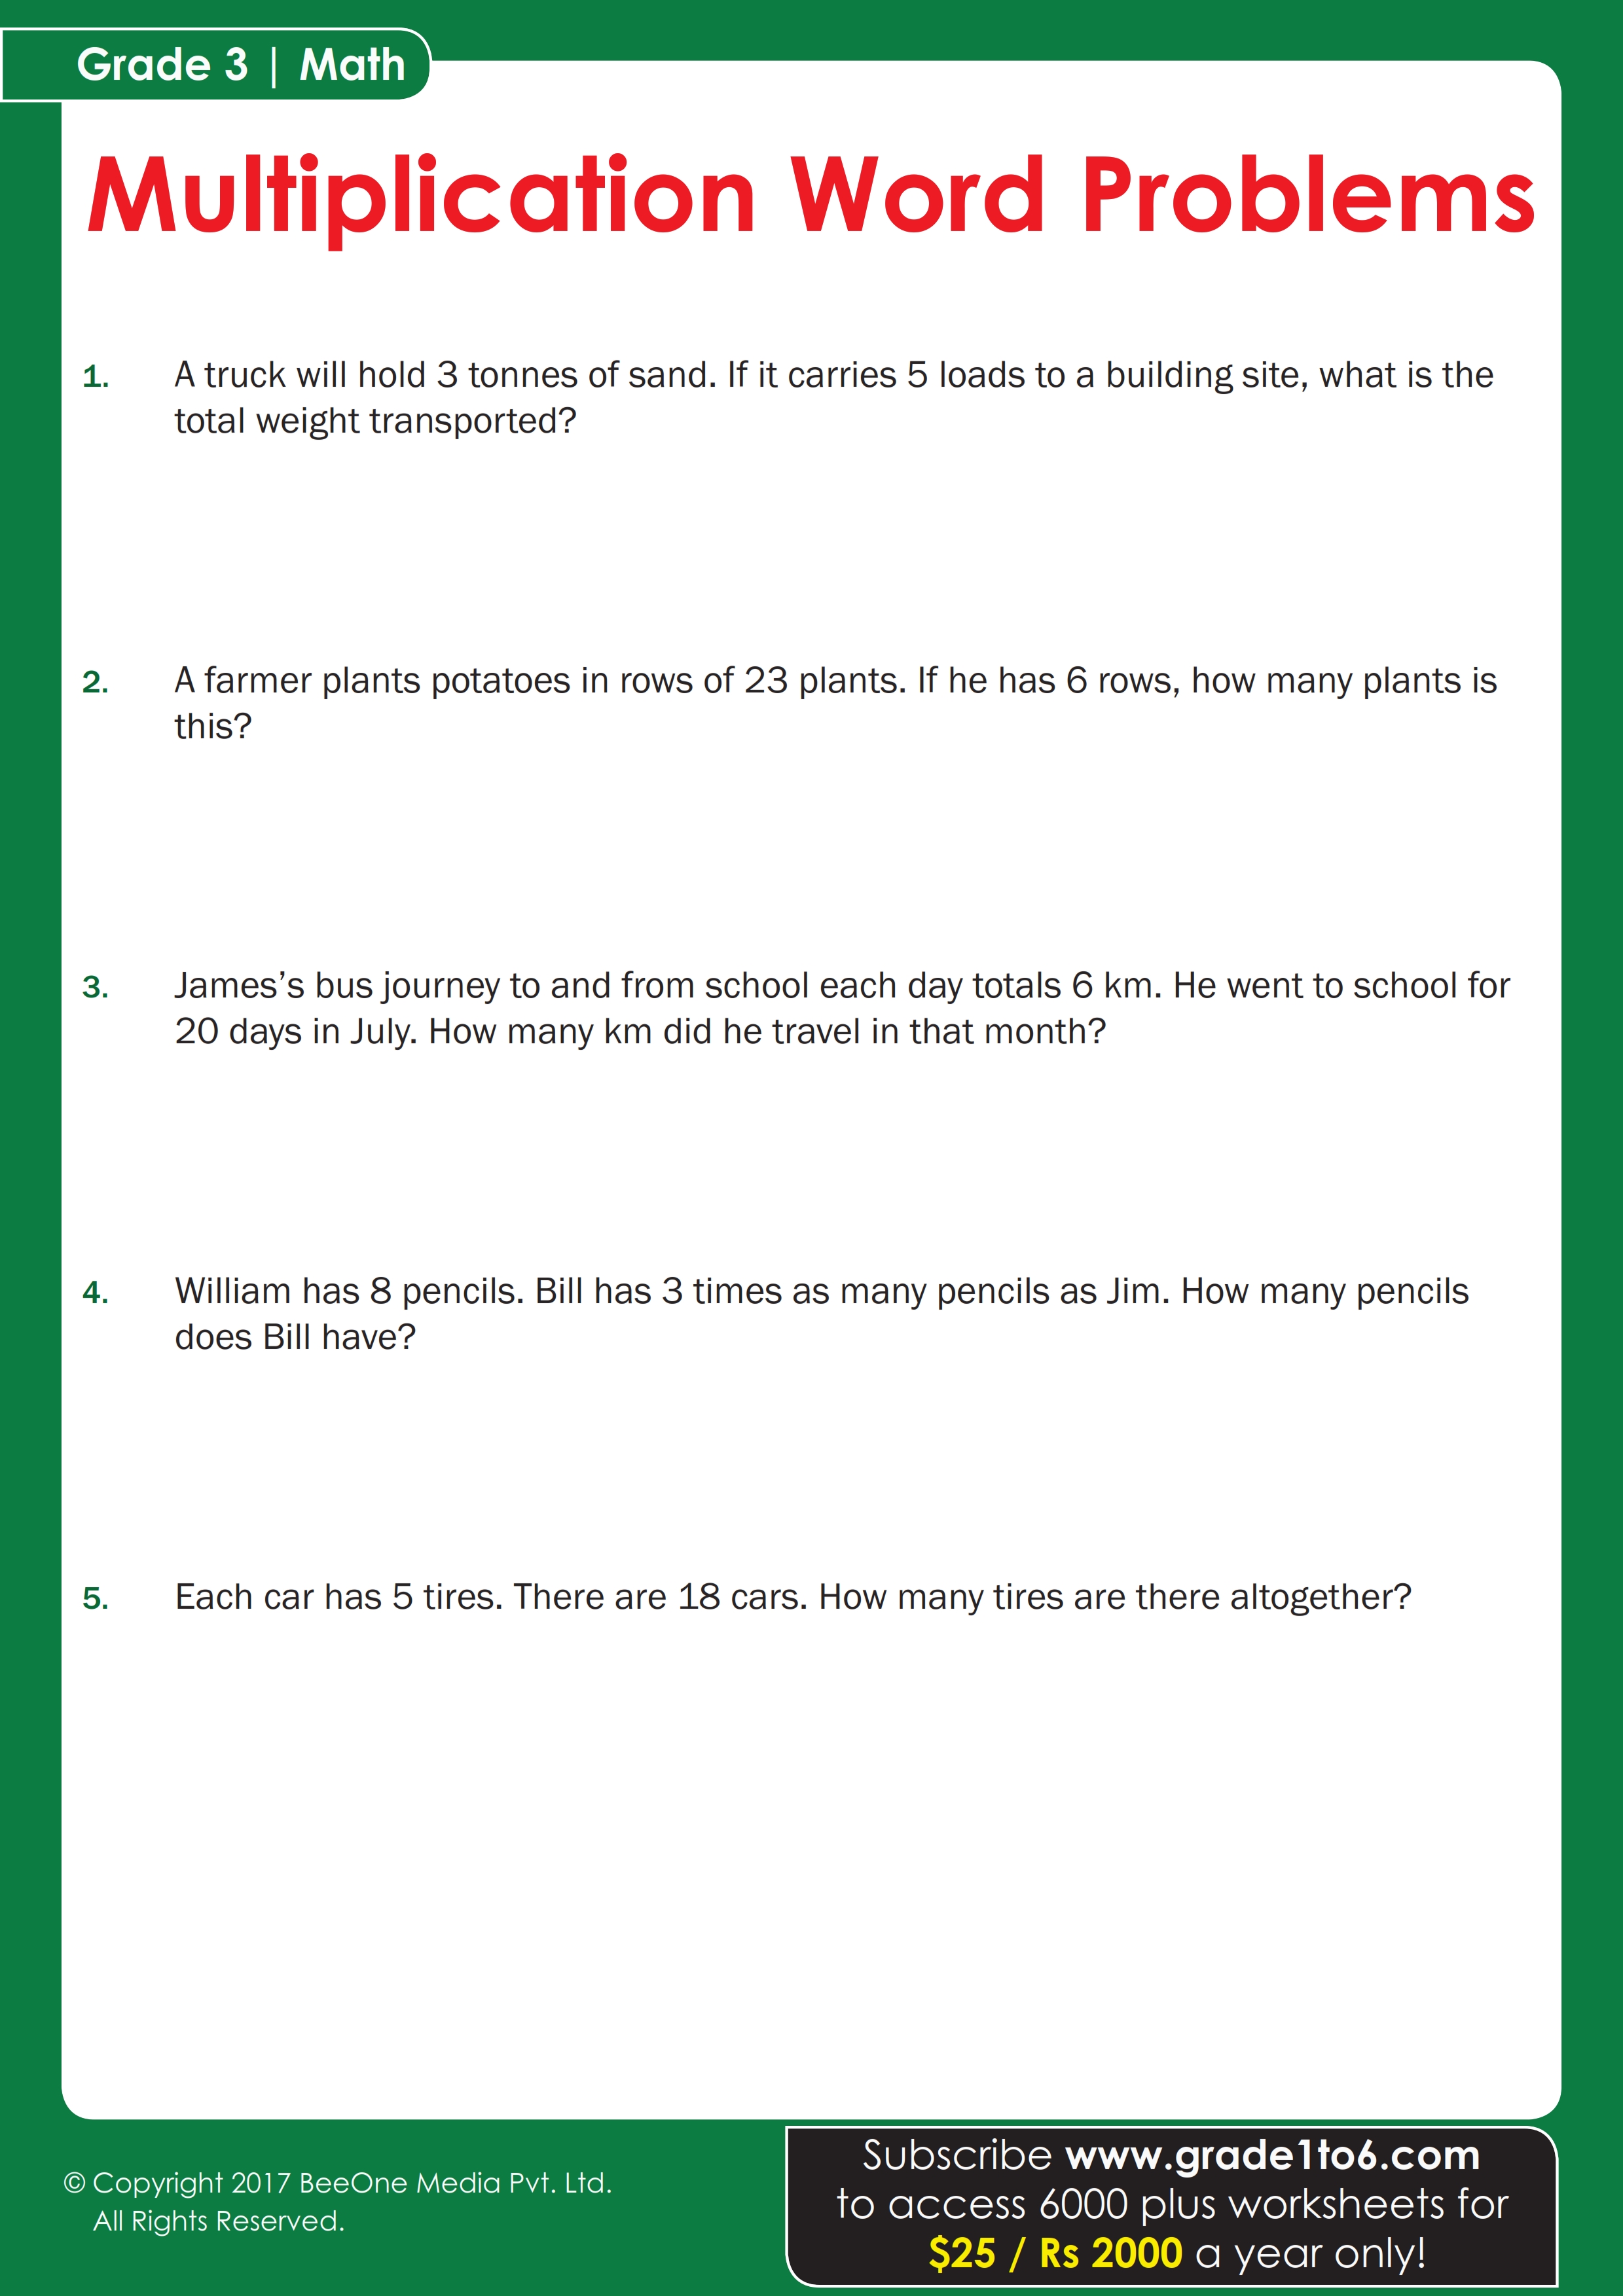 word-problems-on-multiplication-for-grade-3